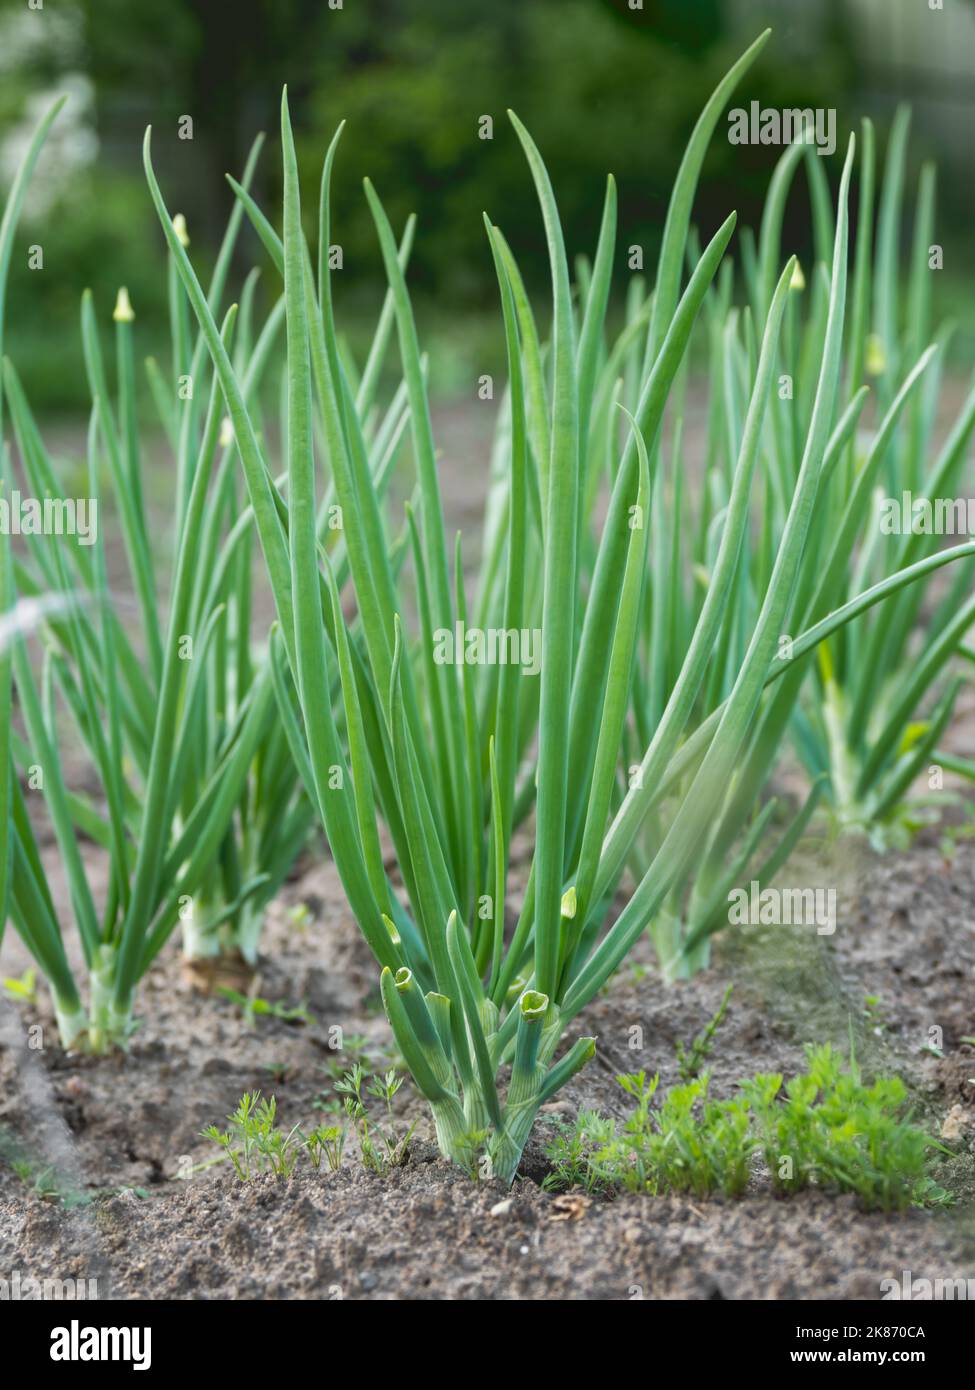 Onion in open ground. Green fresh leaves of edible plant. Gardening at spring and summer. Growing organic food. Stock Photo